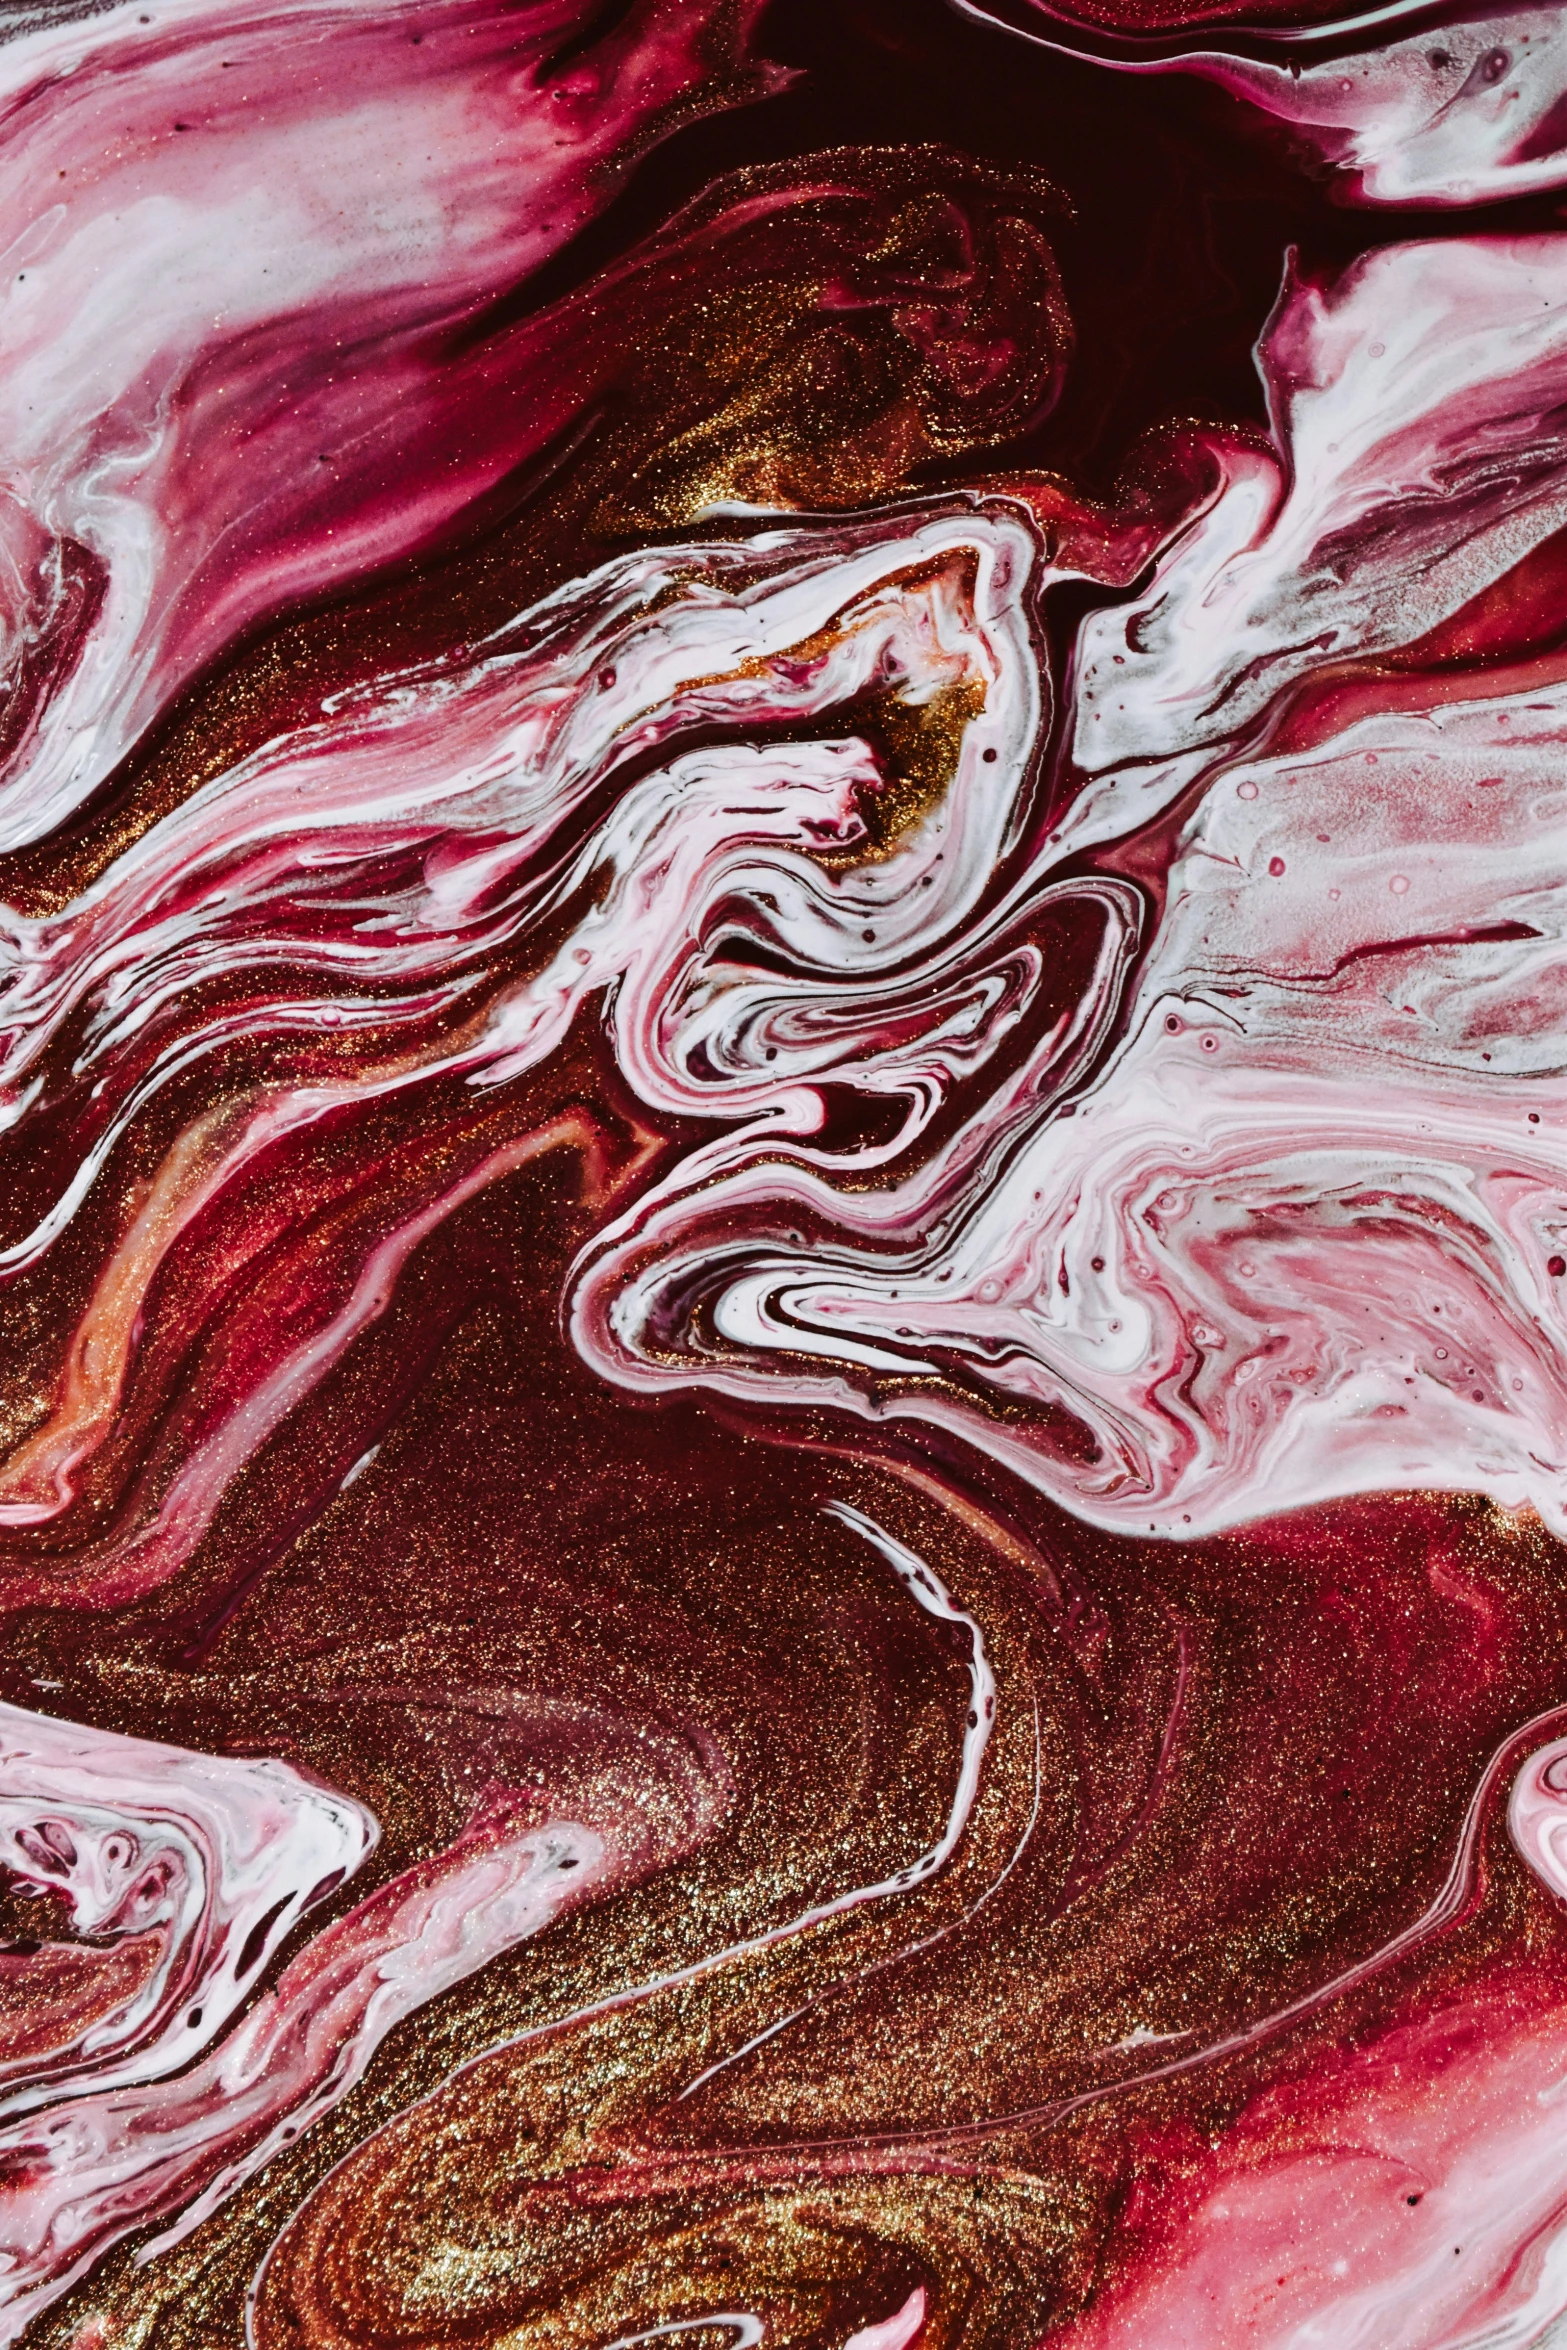 marbled background made up of red, purple and gold colors